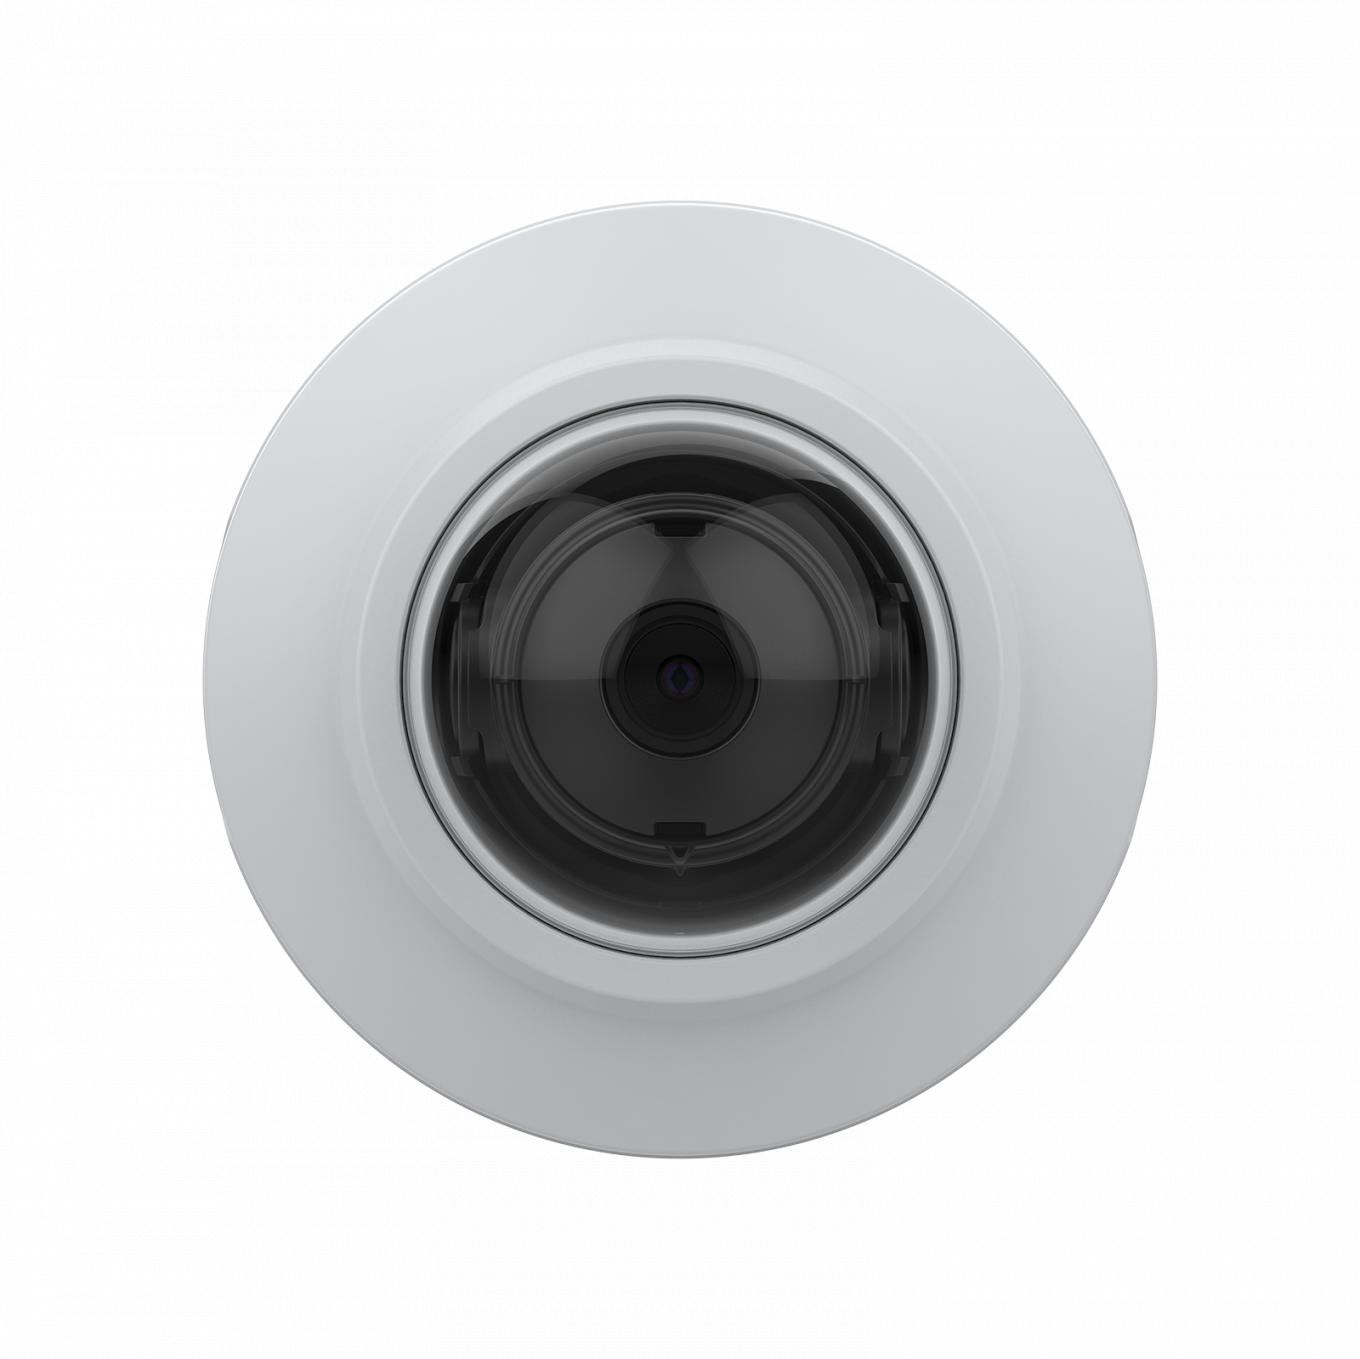 AXIS M3085-V Dome Camera | Axis Communications